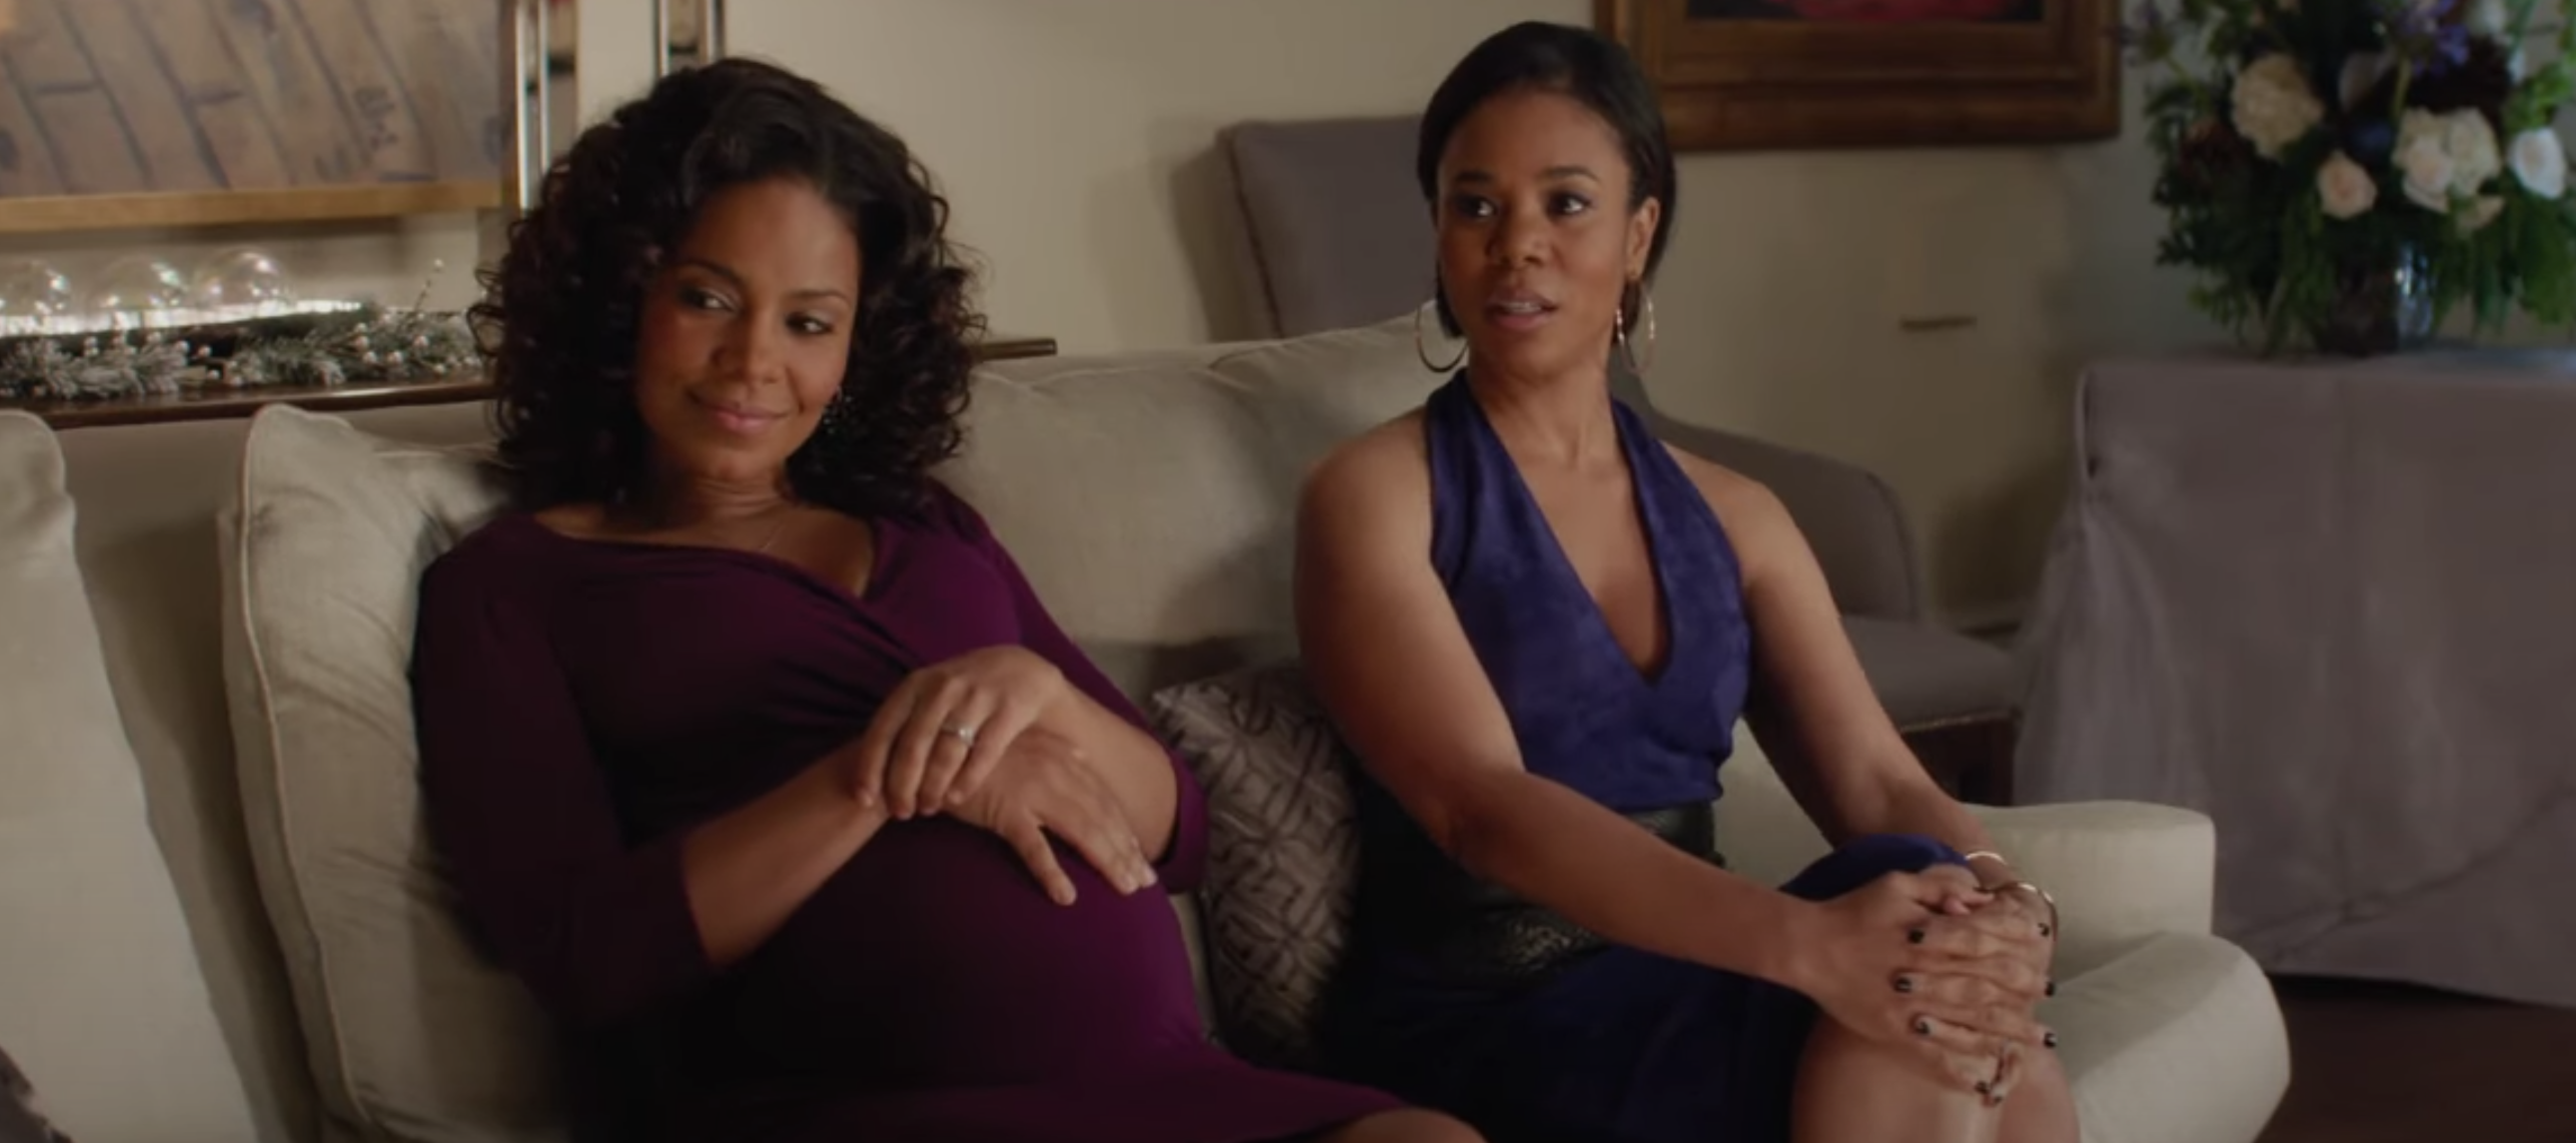 A pregnant woman sitting on a couch next to a woman who isn&#x27;t